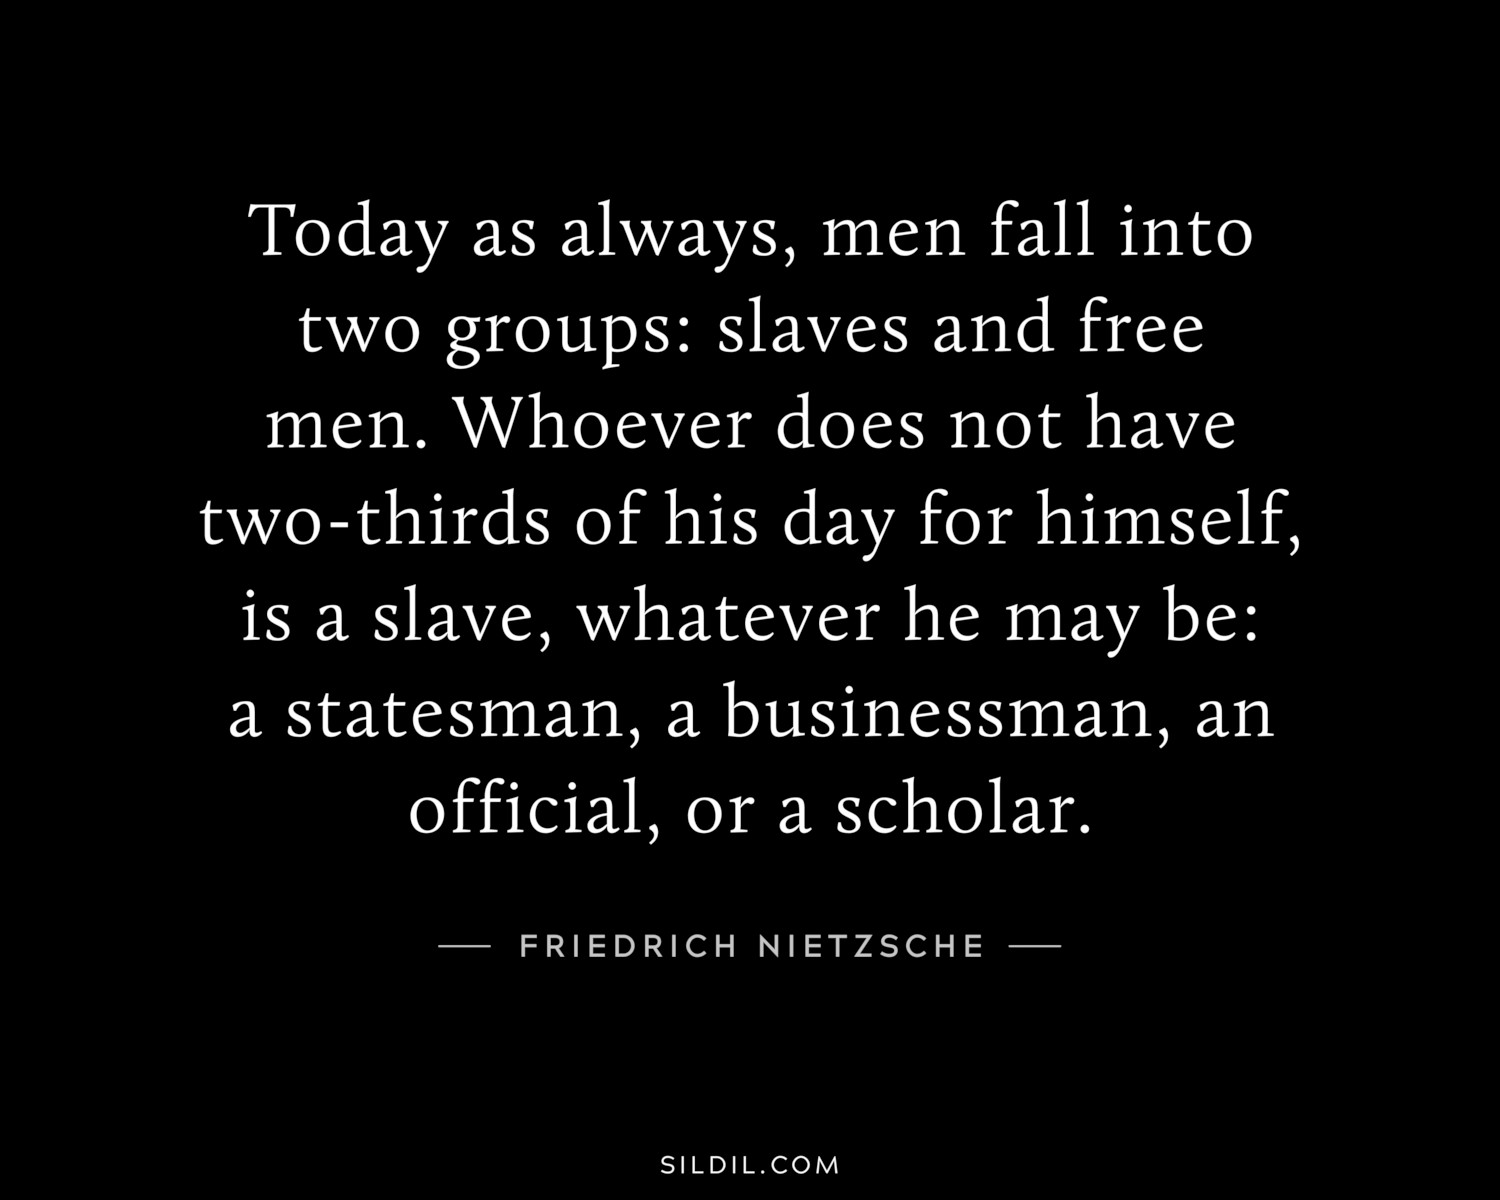 Today as always, men fall into two groups: slaves and free men. Whoever does not have two-thirds of his day for himself, is a slave, whatever he may be: a statesman, a businessman, an official, or a scholar.